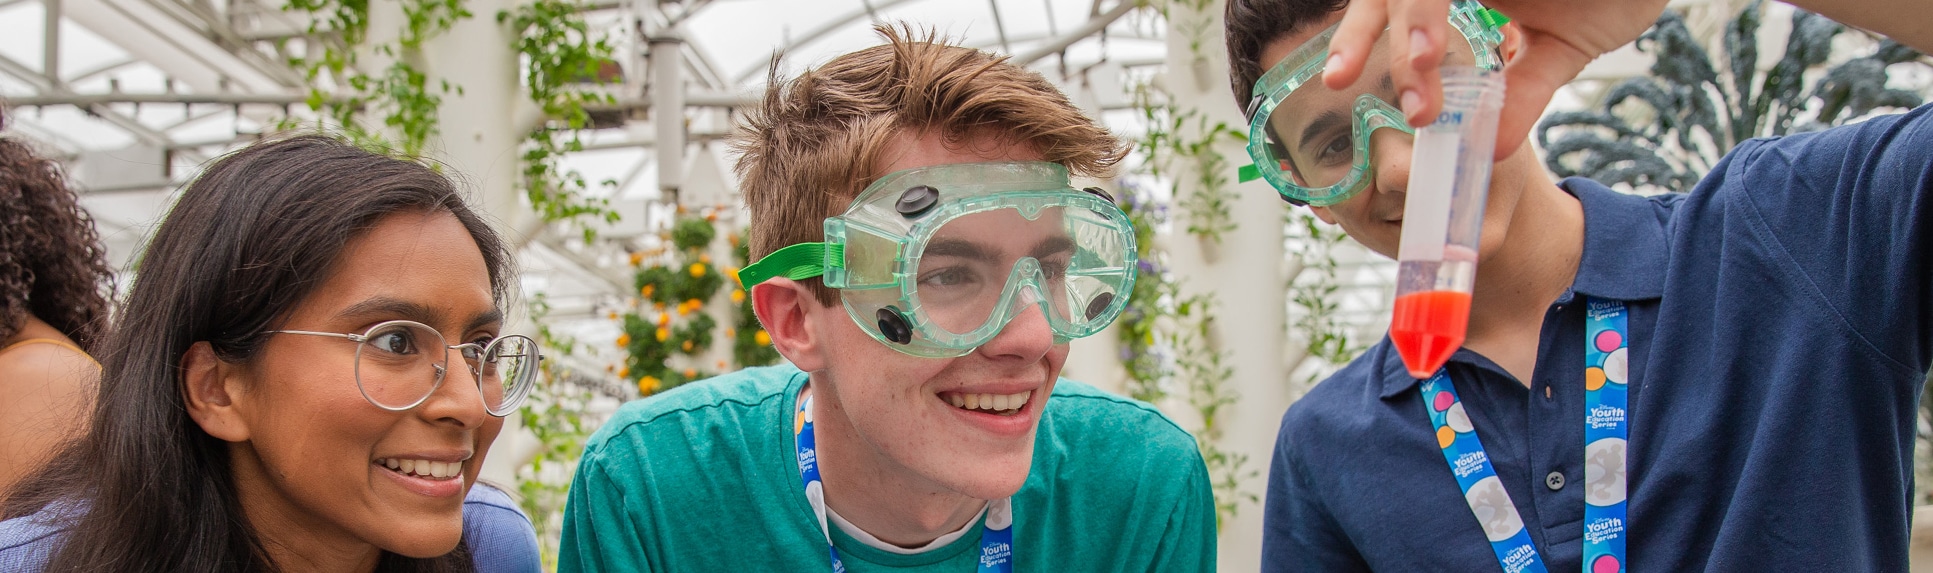 A Cast Member and 2 teenage boys in goggles staring in amazement at a test tube experiment